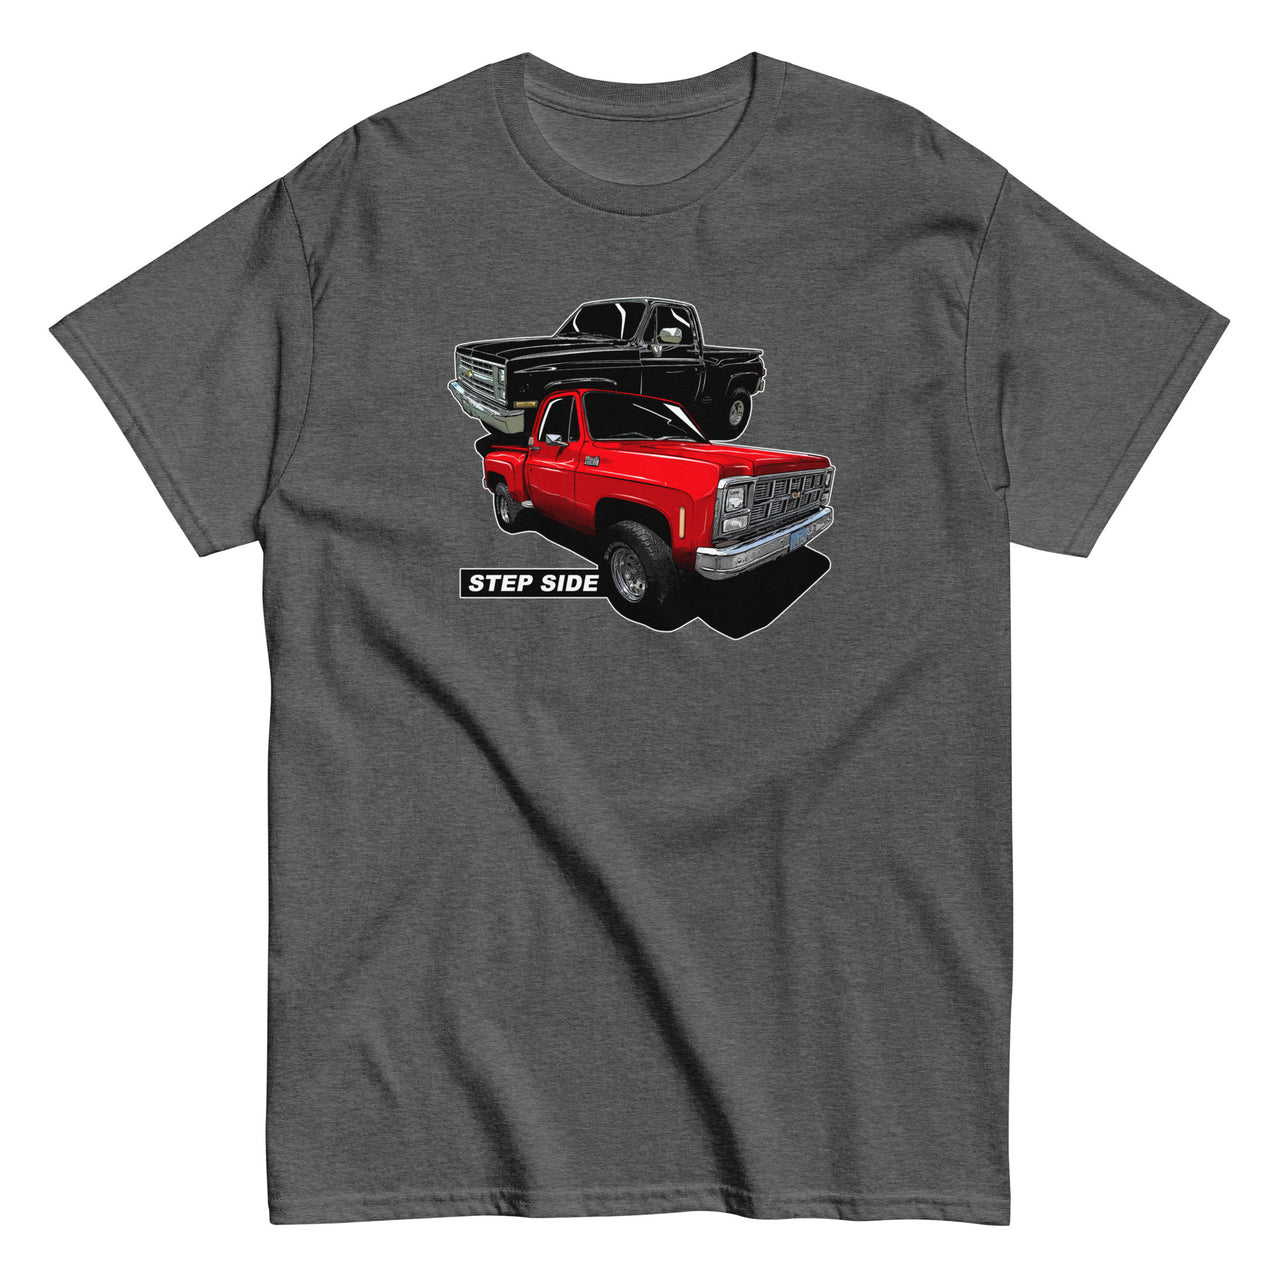 Square Body Step-Side T-Shirt in grey